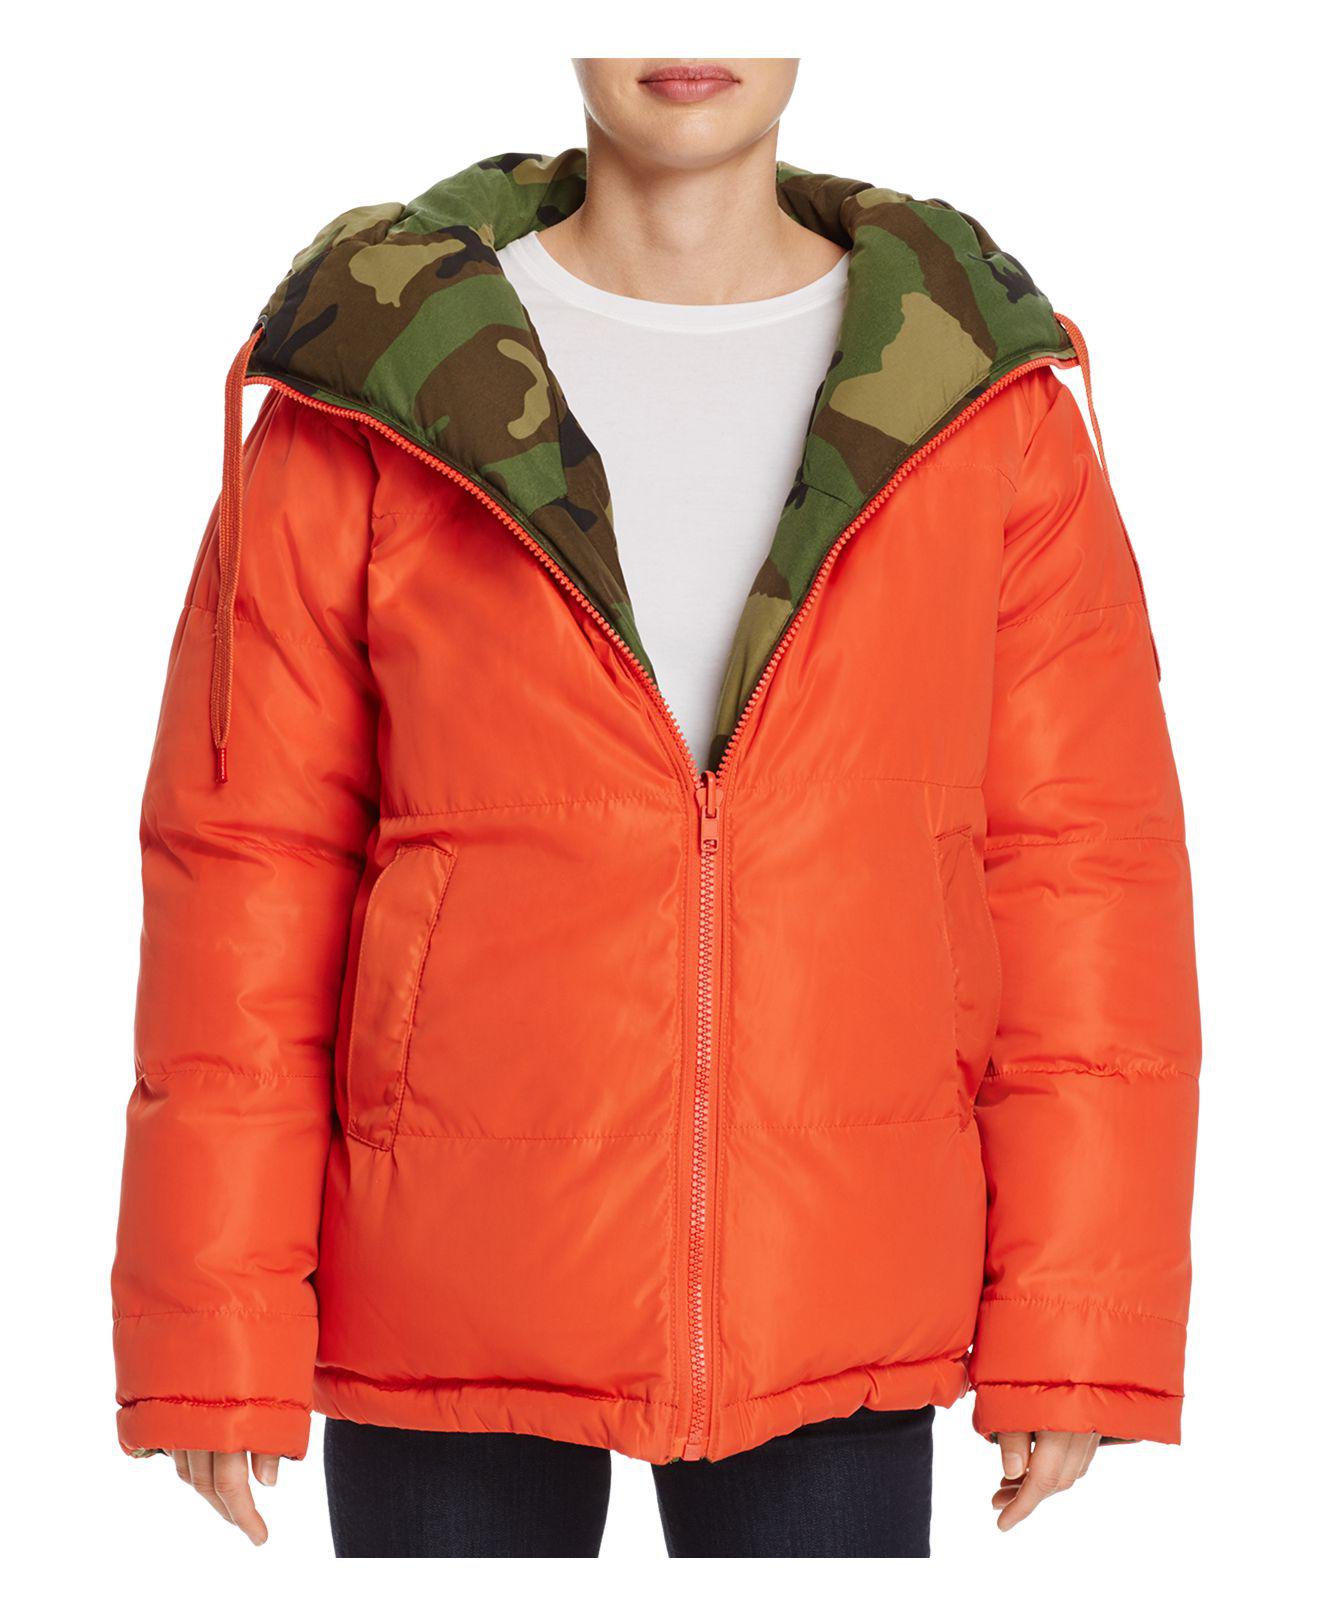 Kendall + Kylie Camouflage Down Jacket in Camo/Orange (Green) - Lyst